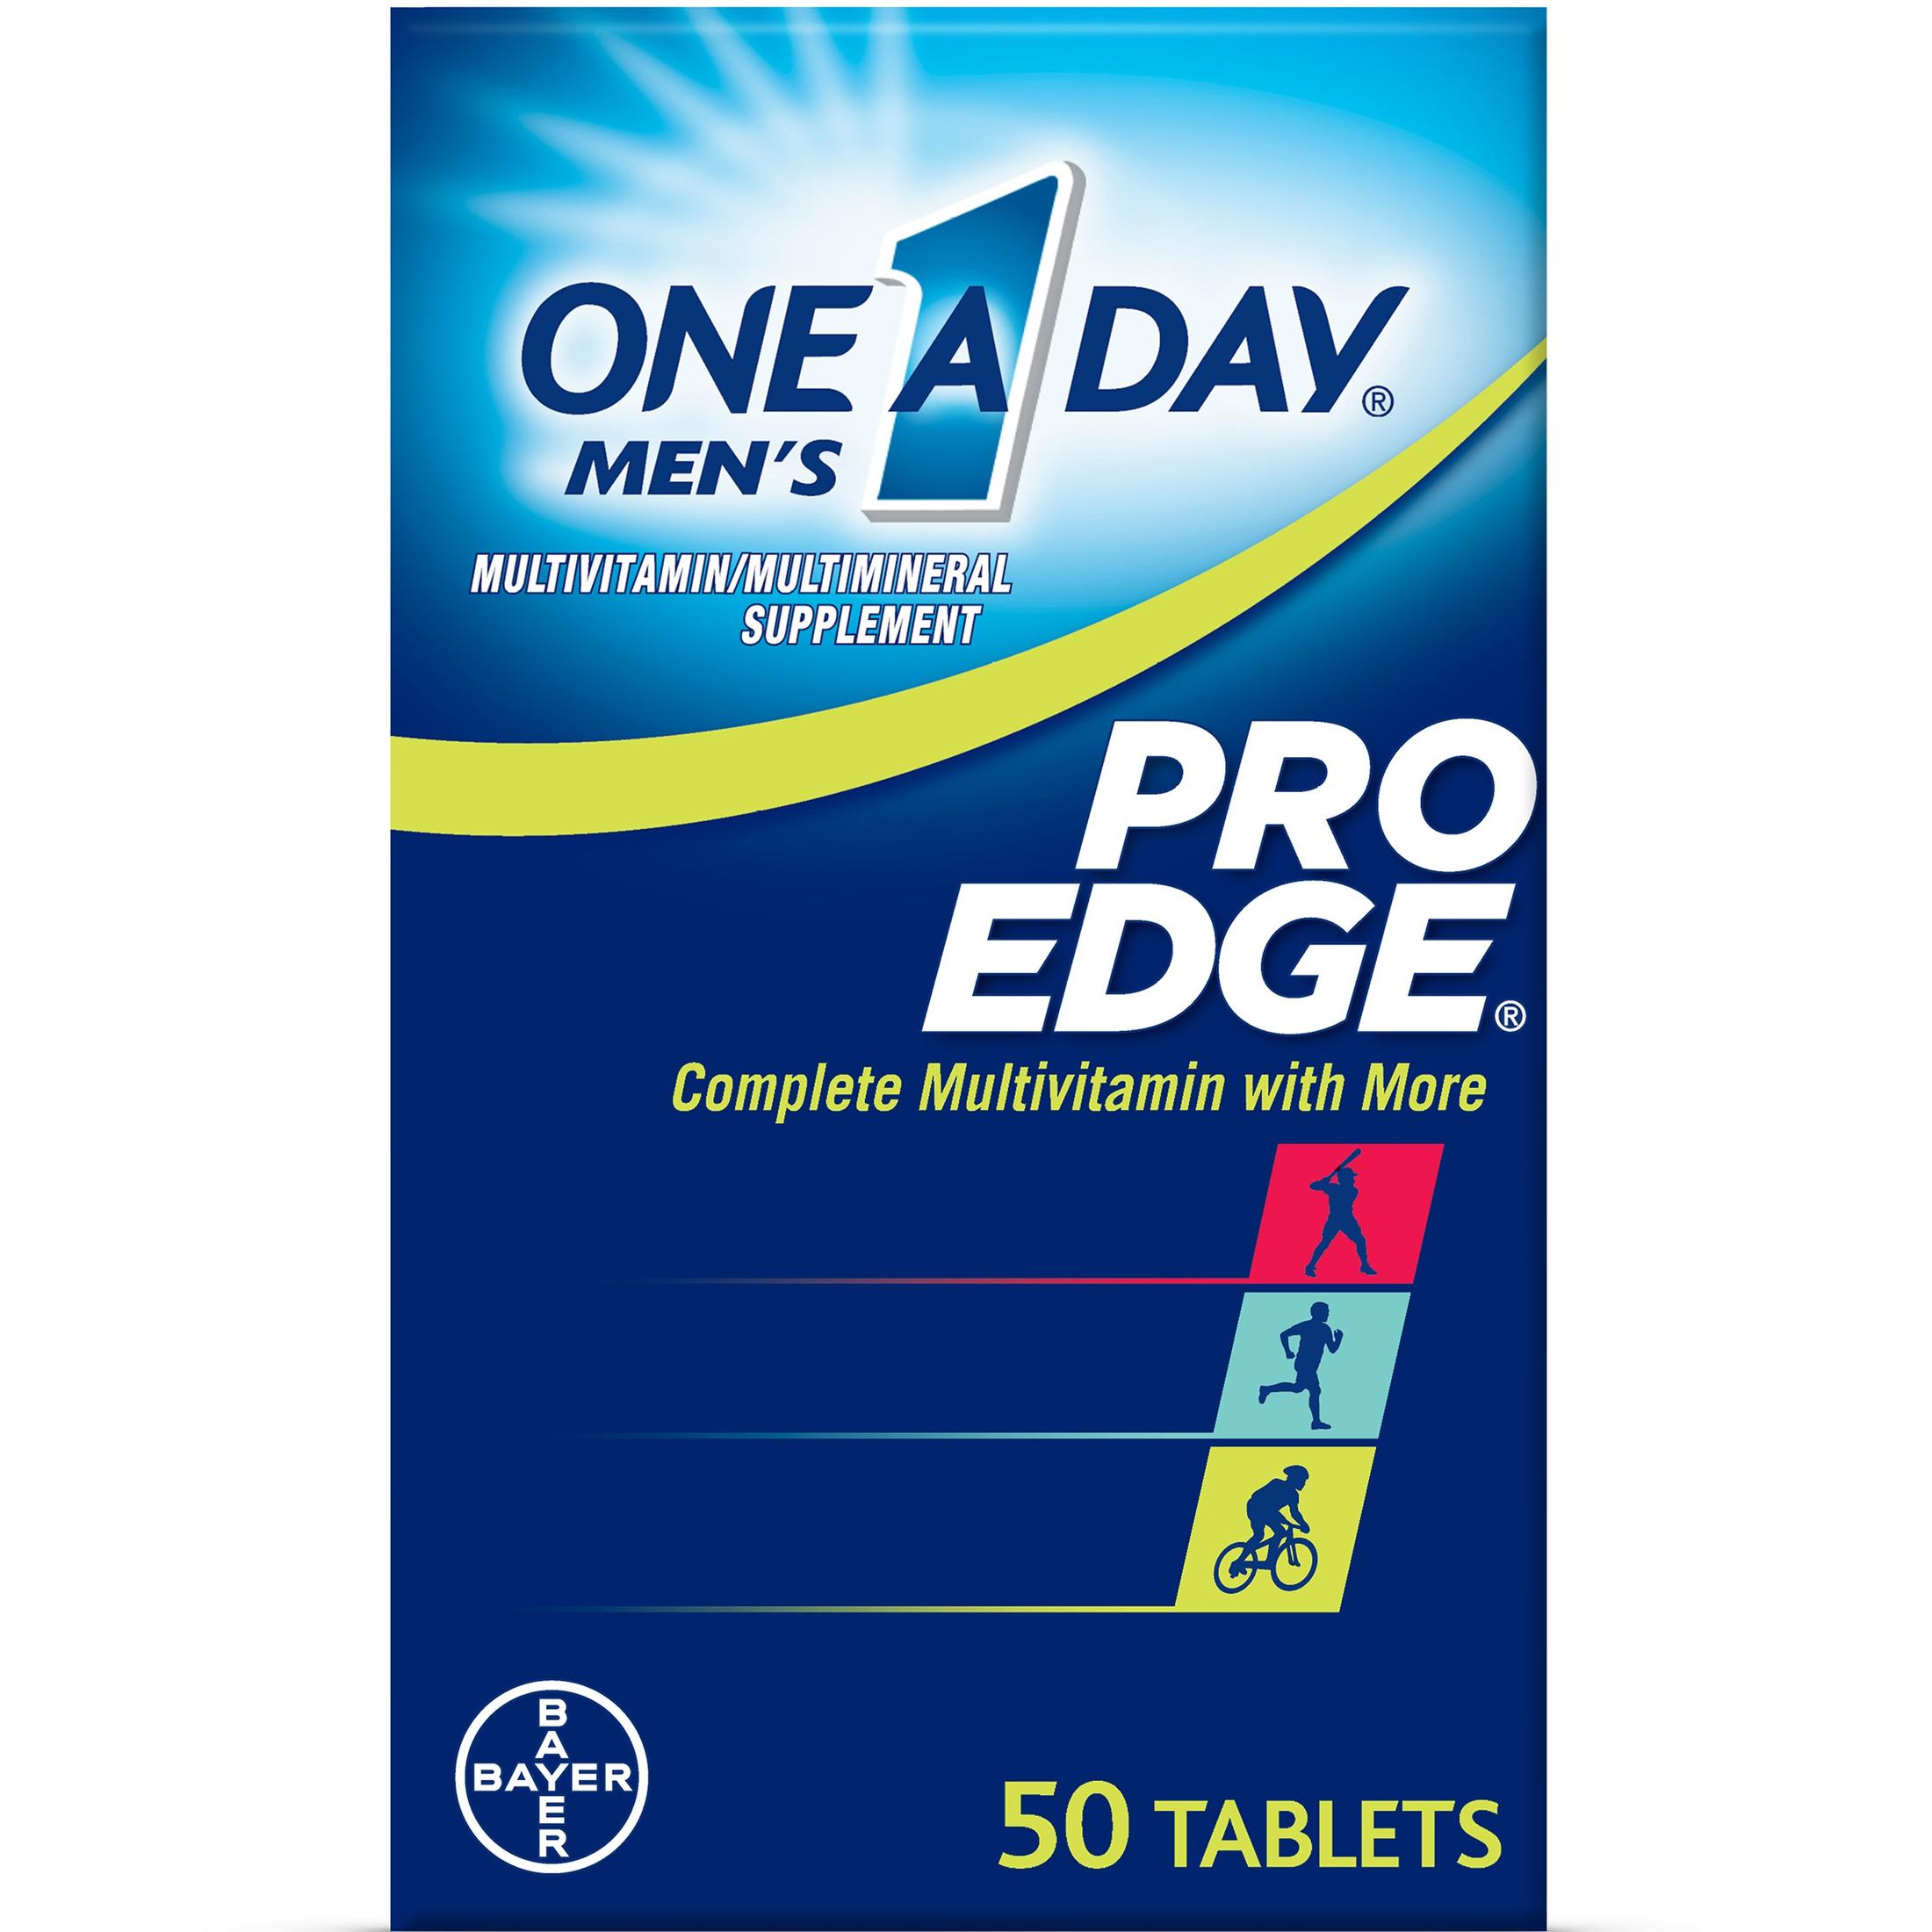 One A Day Men's Pro Edge Multivitamin Tablets, Multivitamins for Men, 50 Ct - image 1 of 15